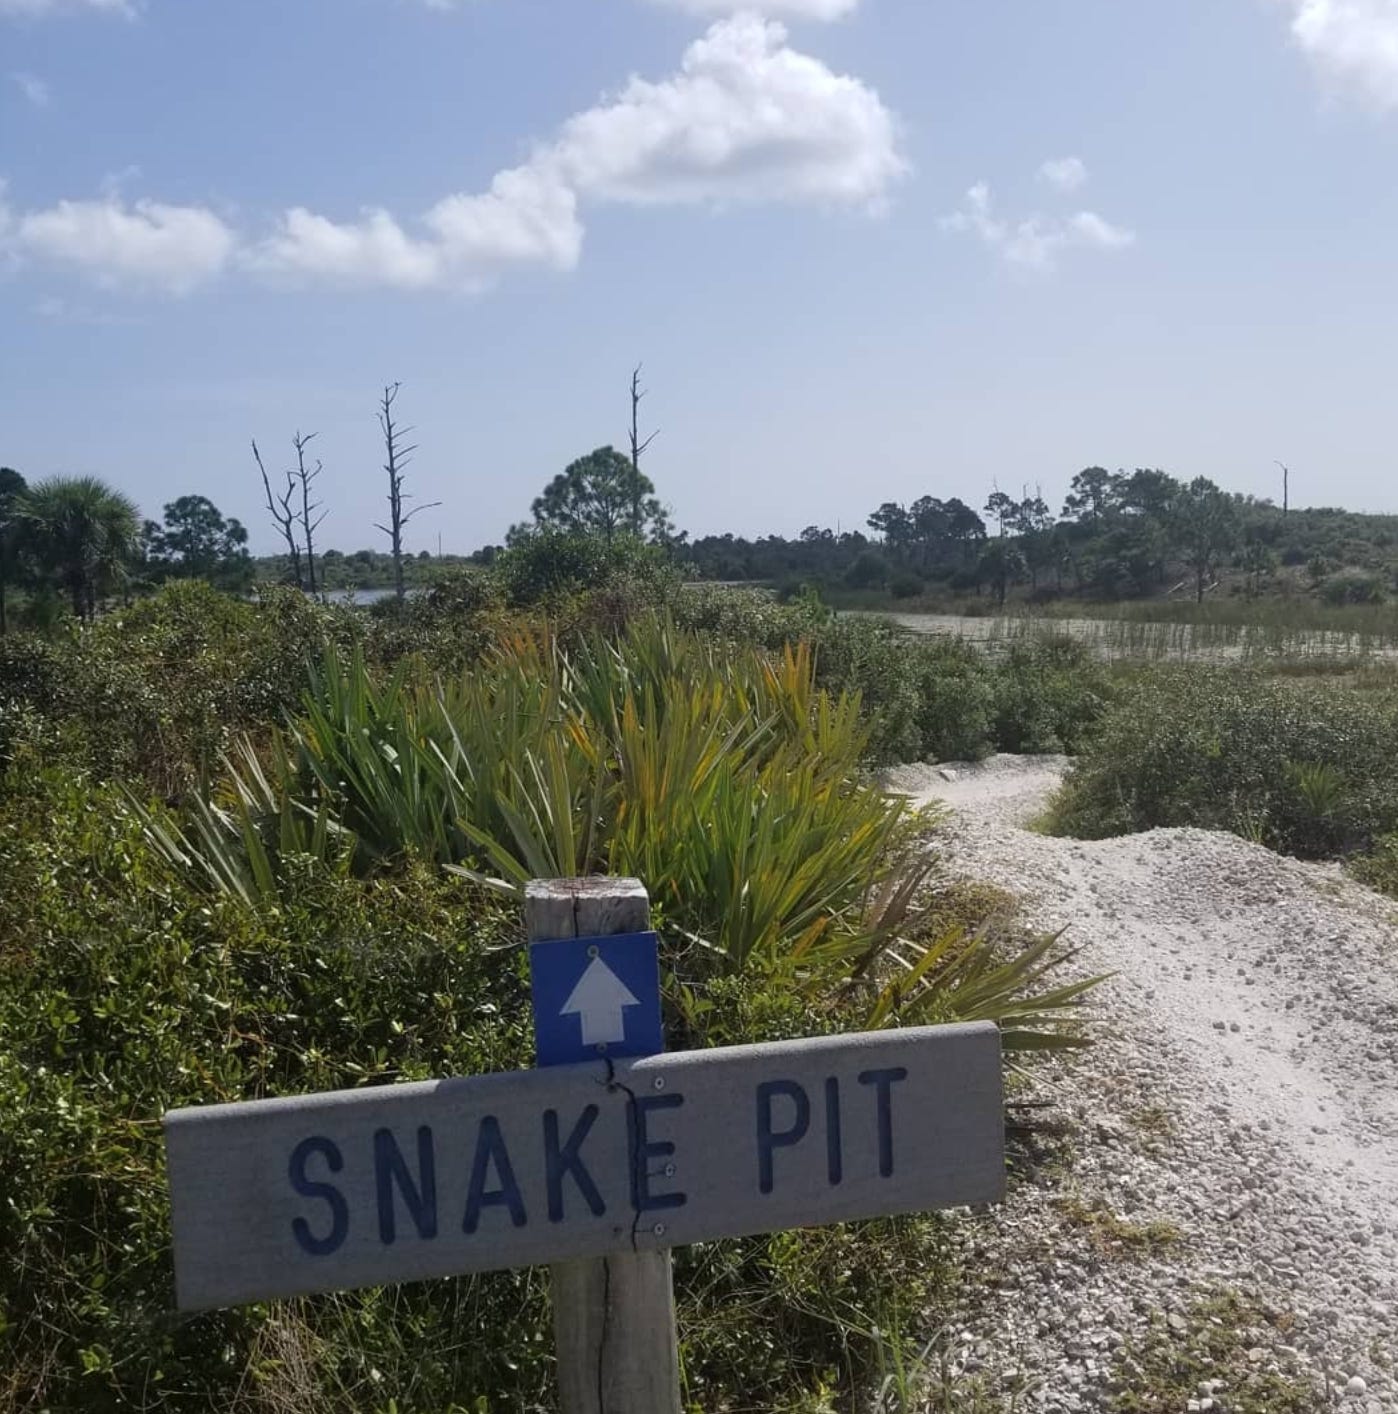 A trail sign advertises "Snake pit," ahead of a dip and banked turn going into a mountain biking trail.